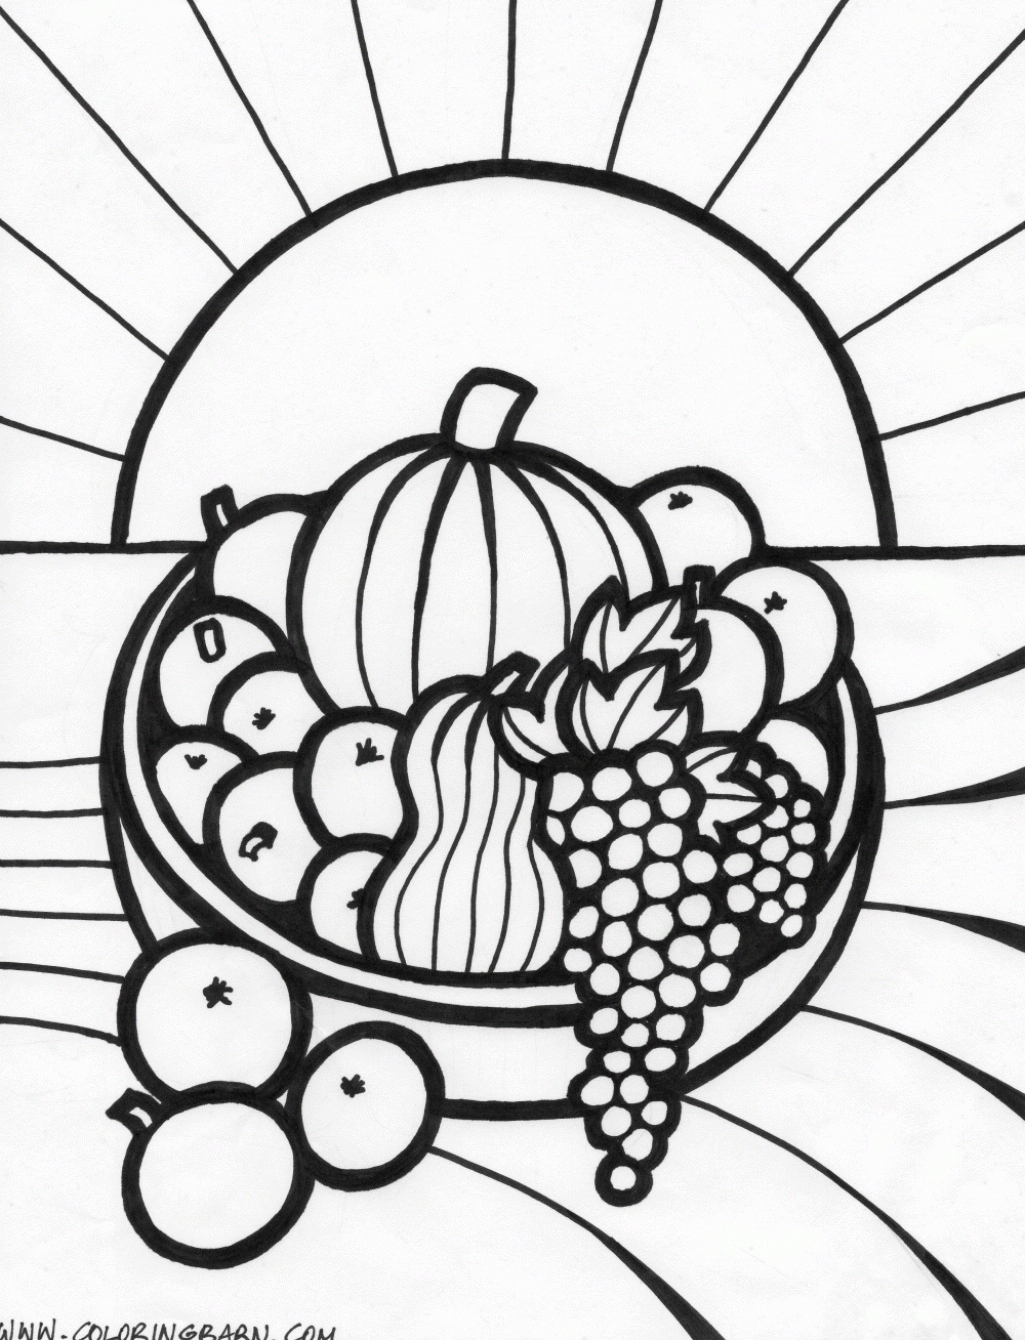 Coloring Pages Of Fruit Basket | Step ColorinG